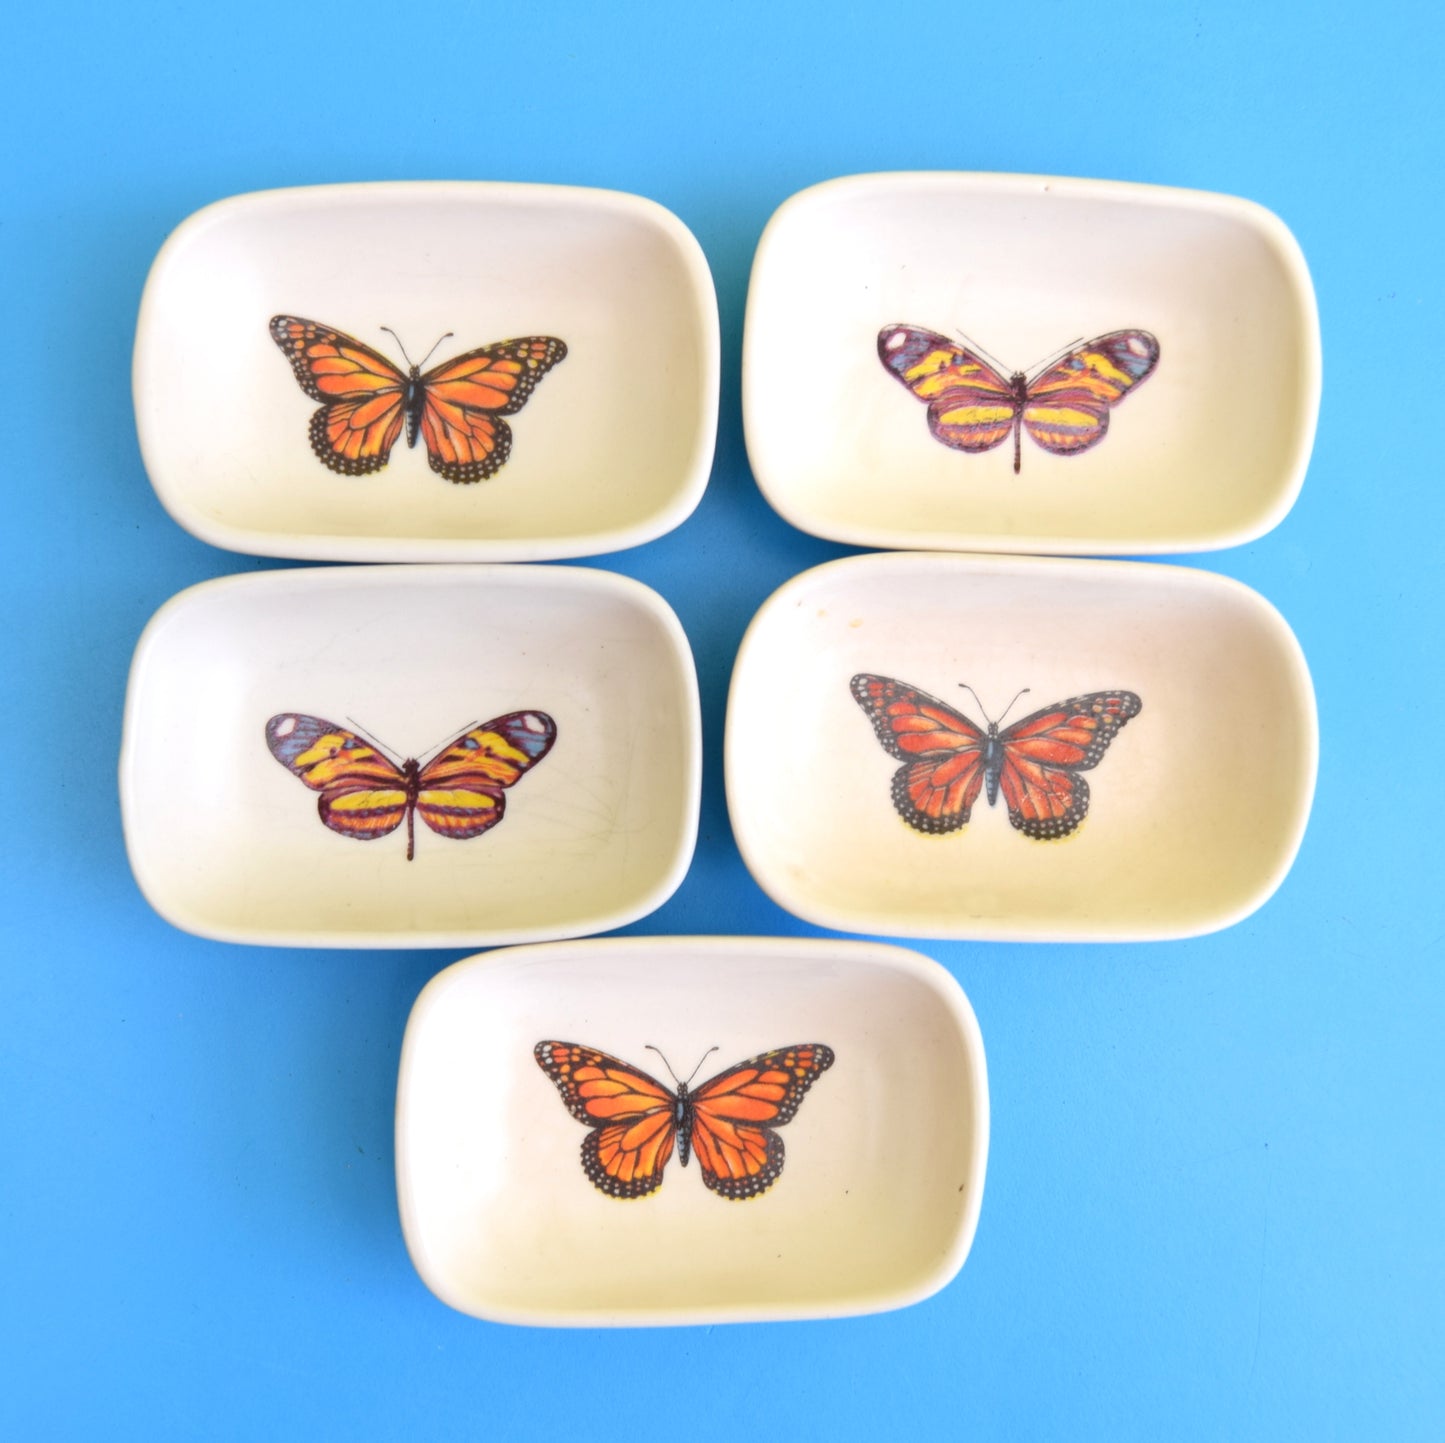 Vintage 1950s Butter Dishes - Butterflies x5